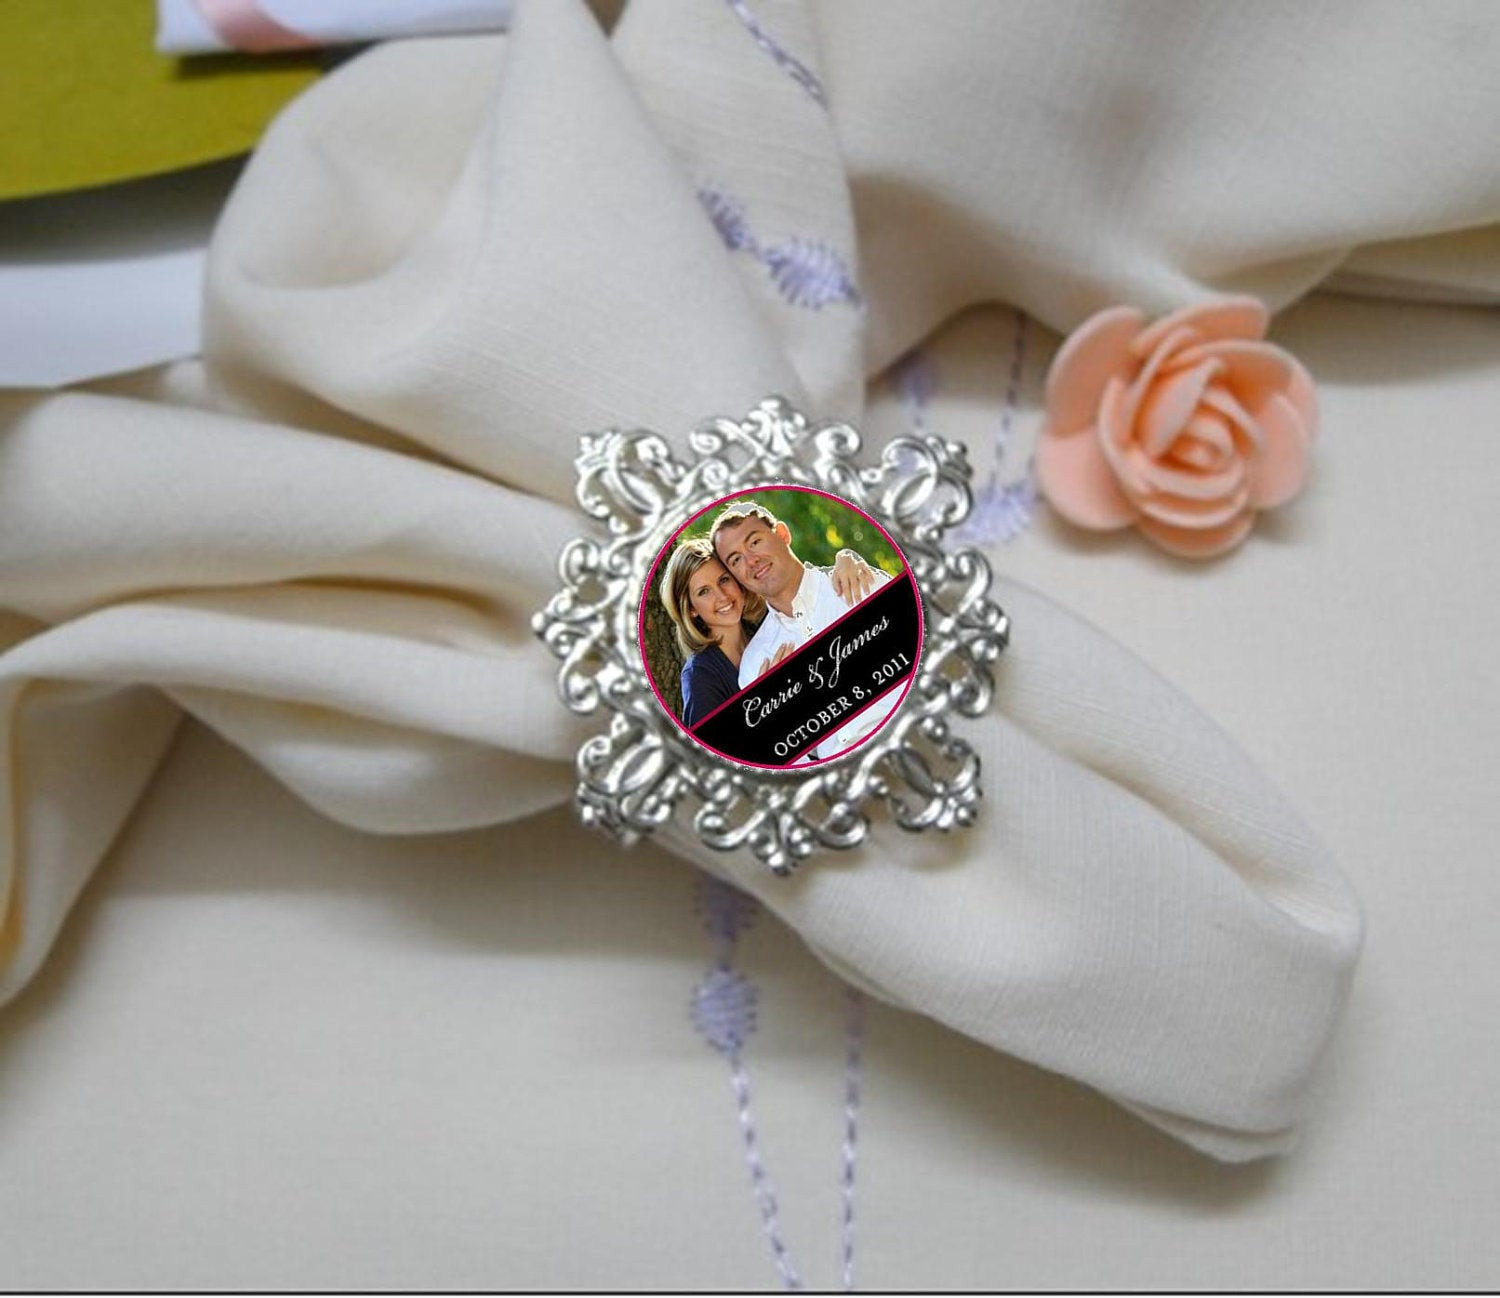 Wedding Napkin Rings
 Wedding Favors Personalized Napkin Rings by jYOUlry on Etsy